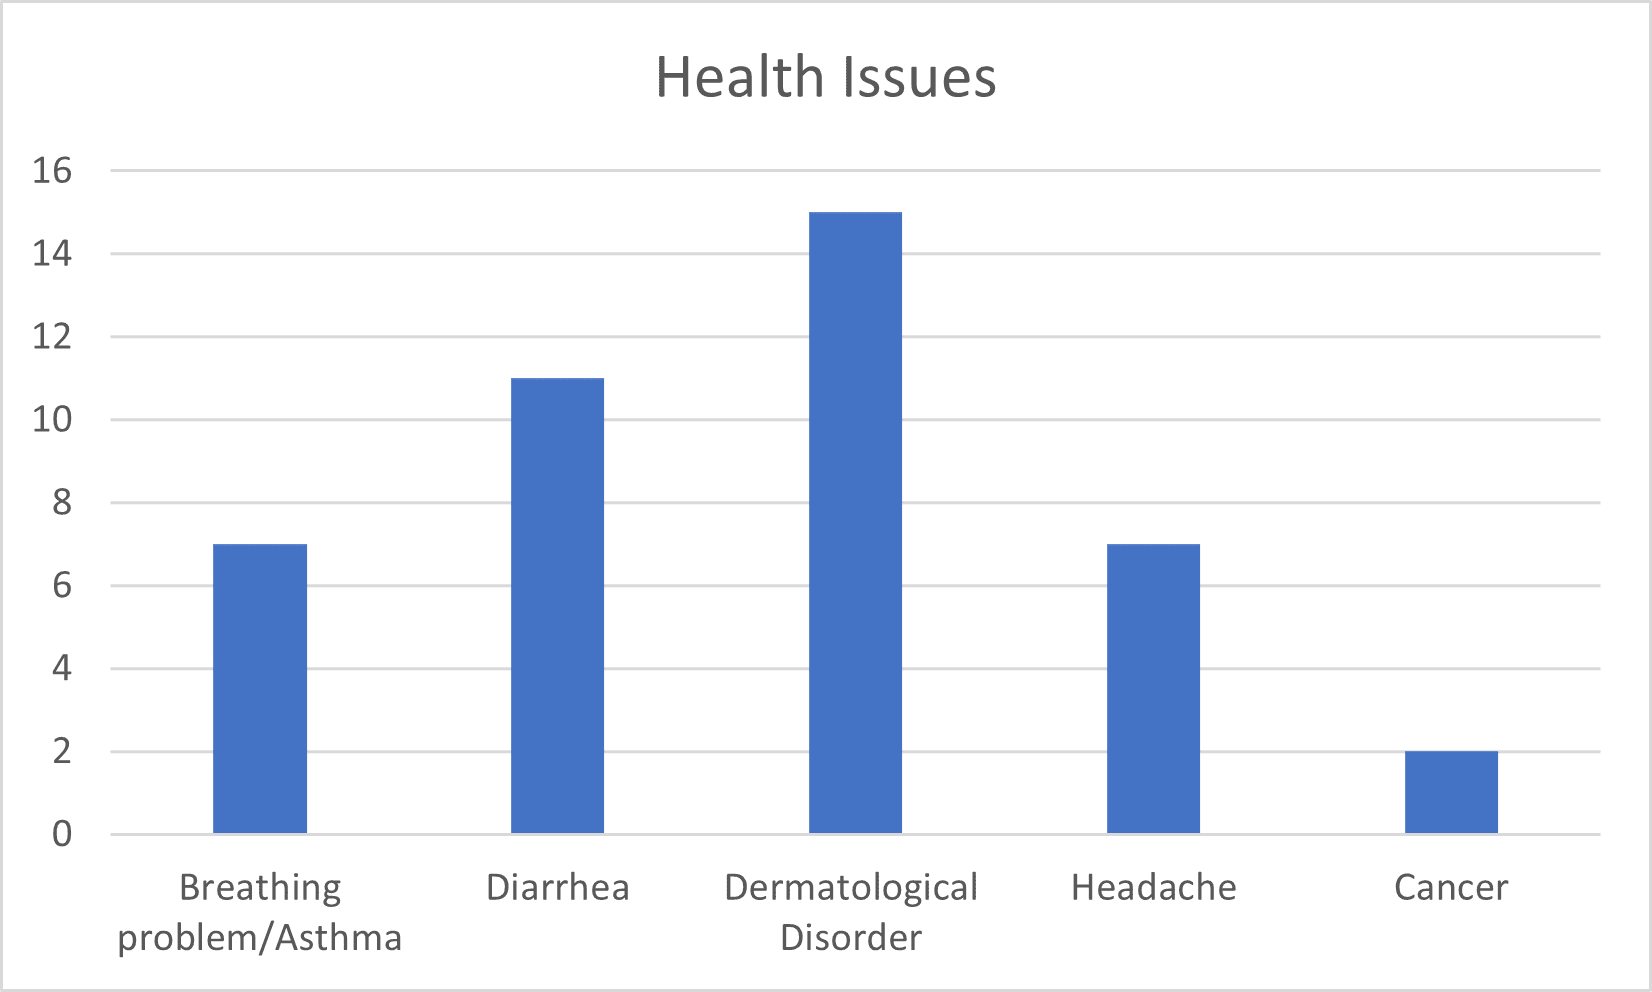 Common health issues among the respondents